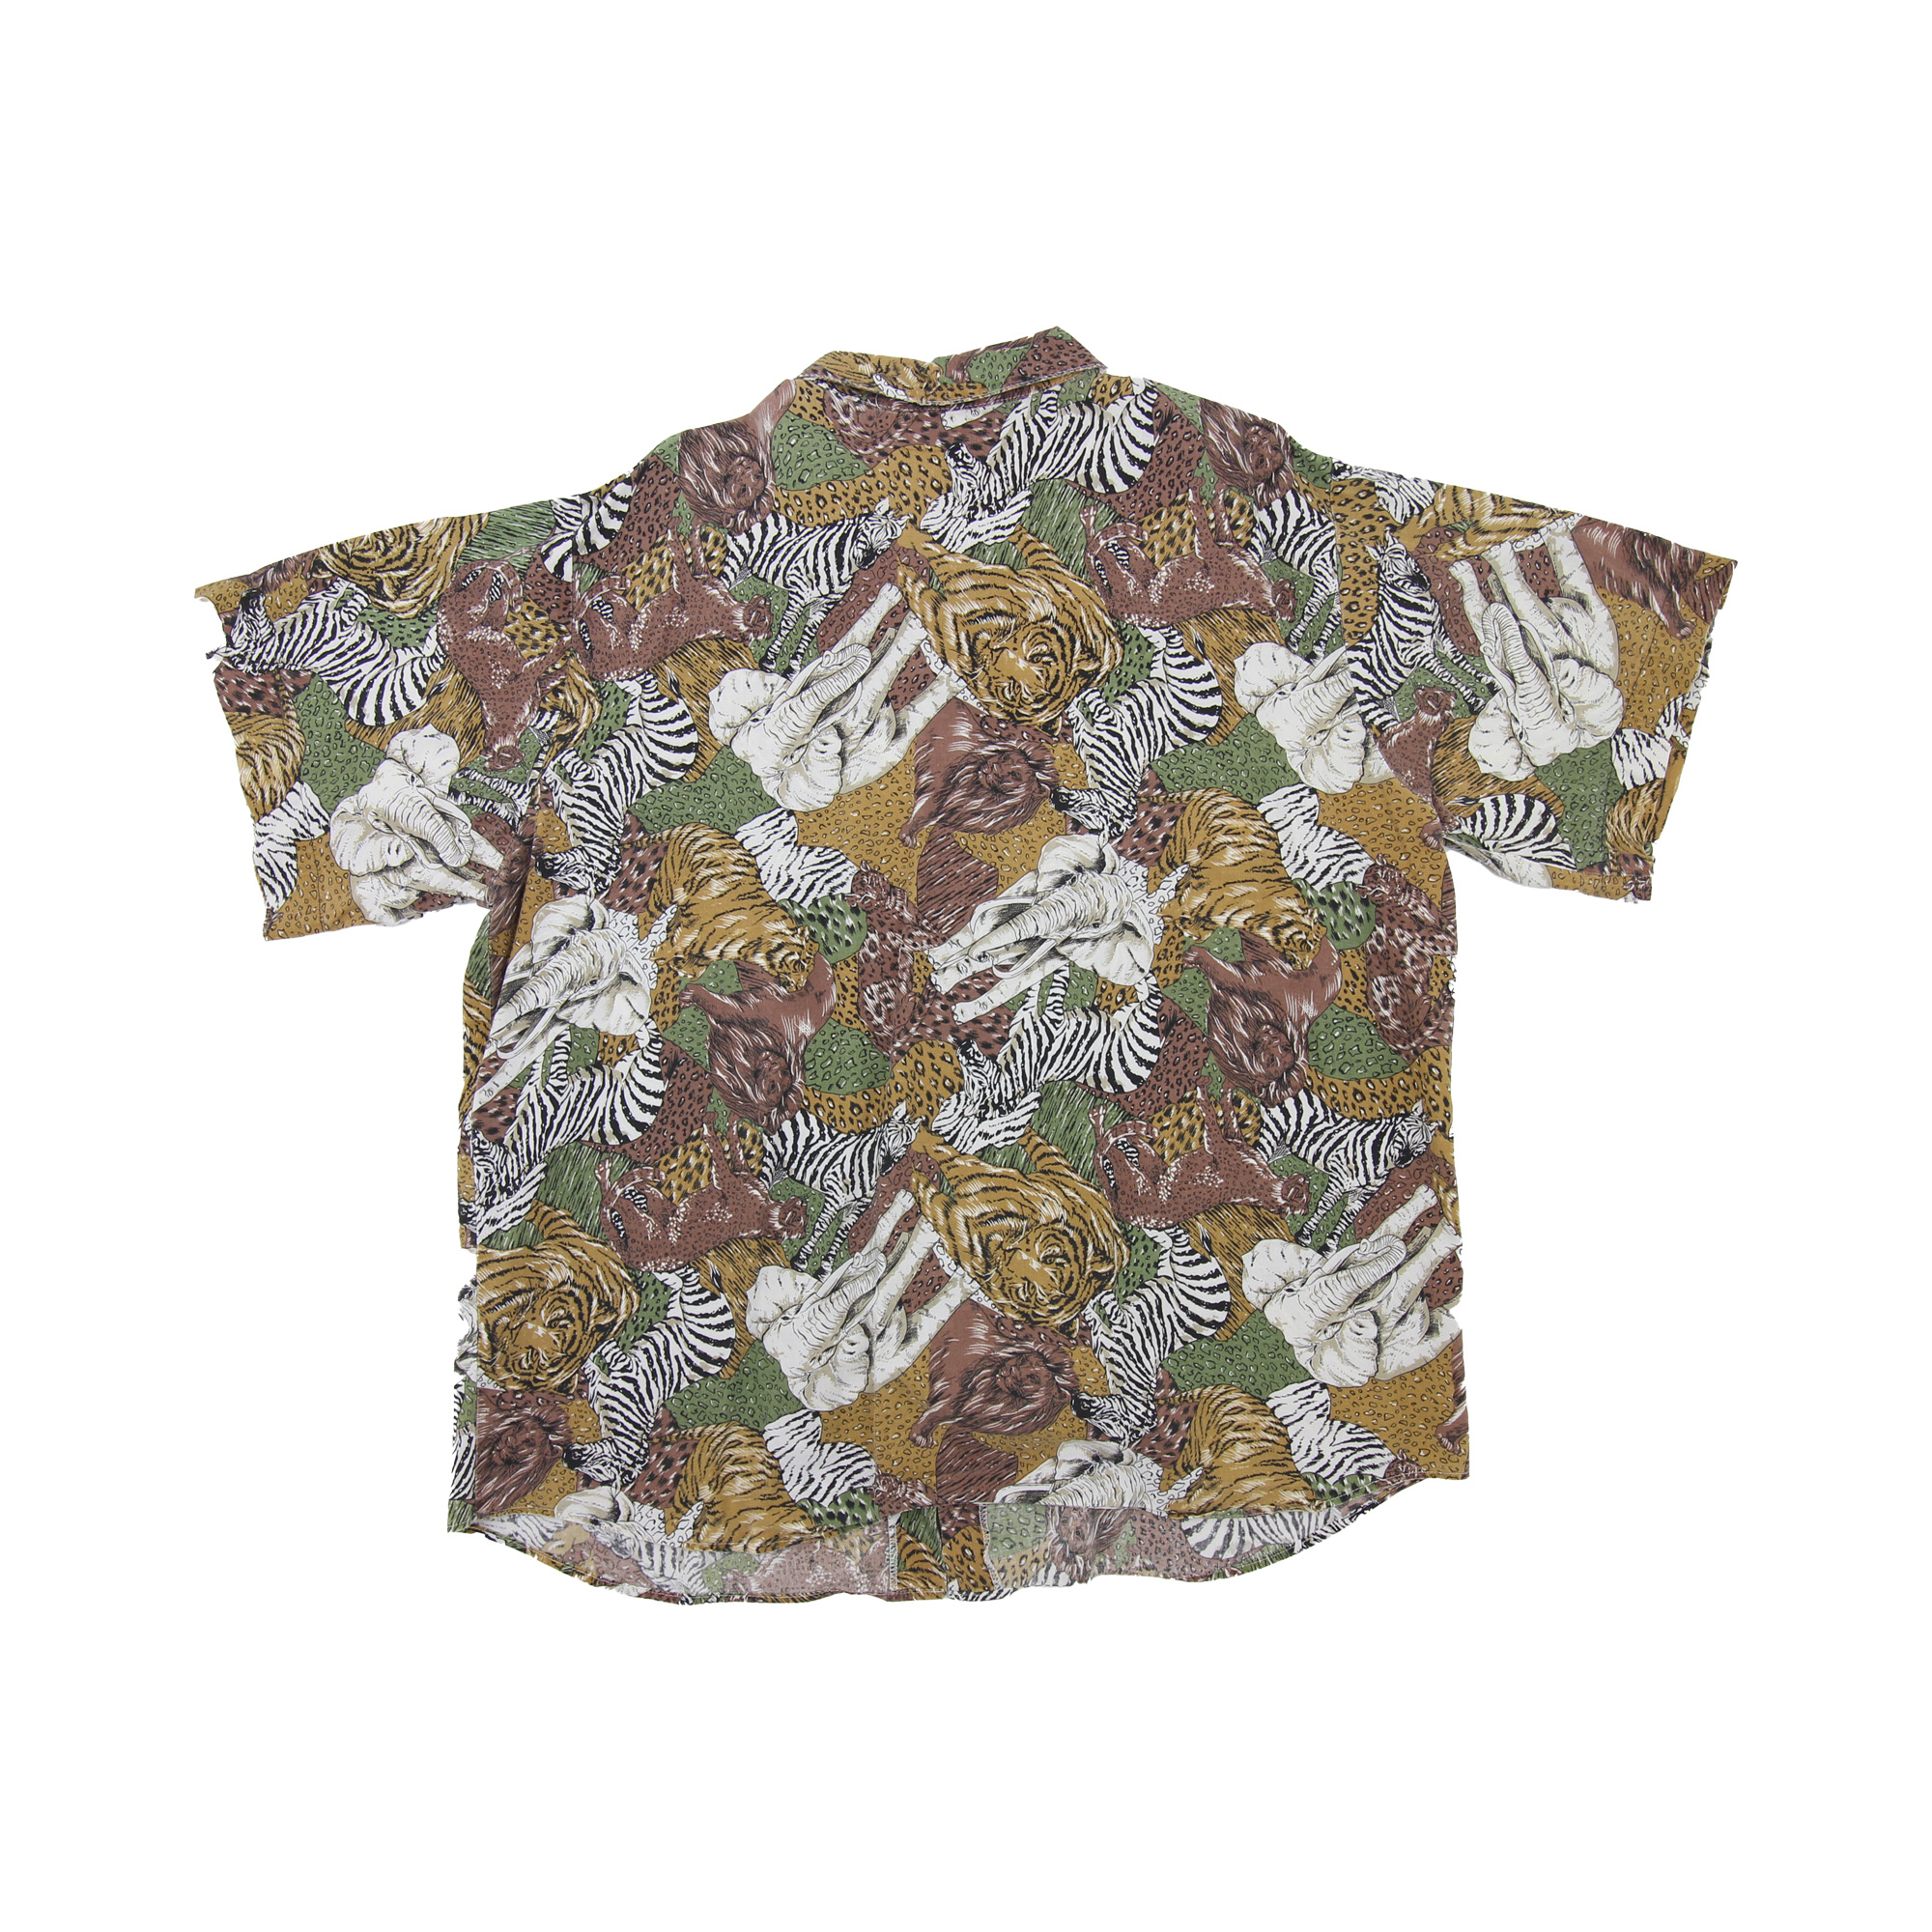 Separate Issue Vintage Short Sleeve Shirt -  L